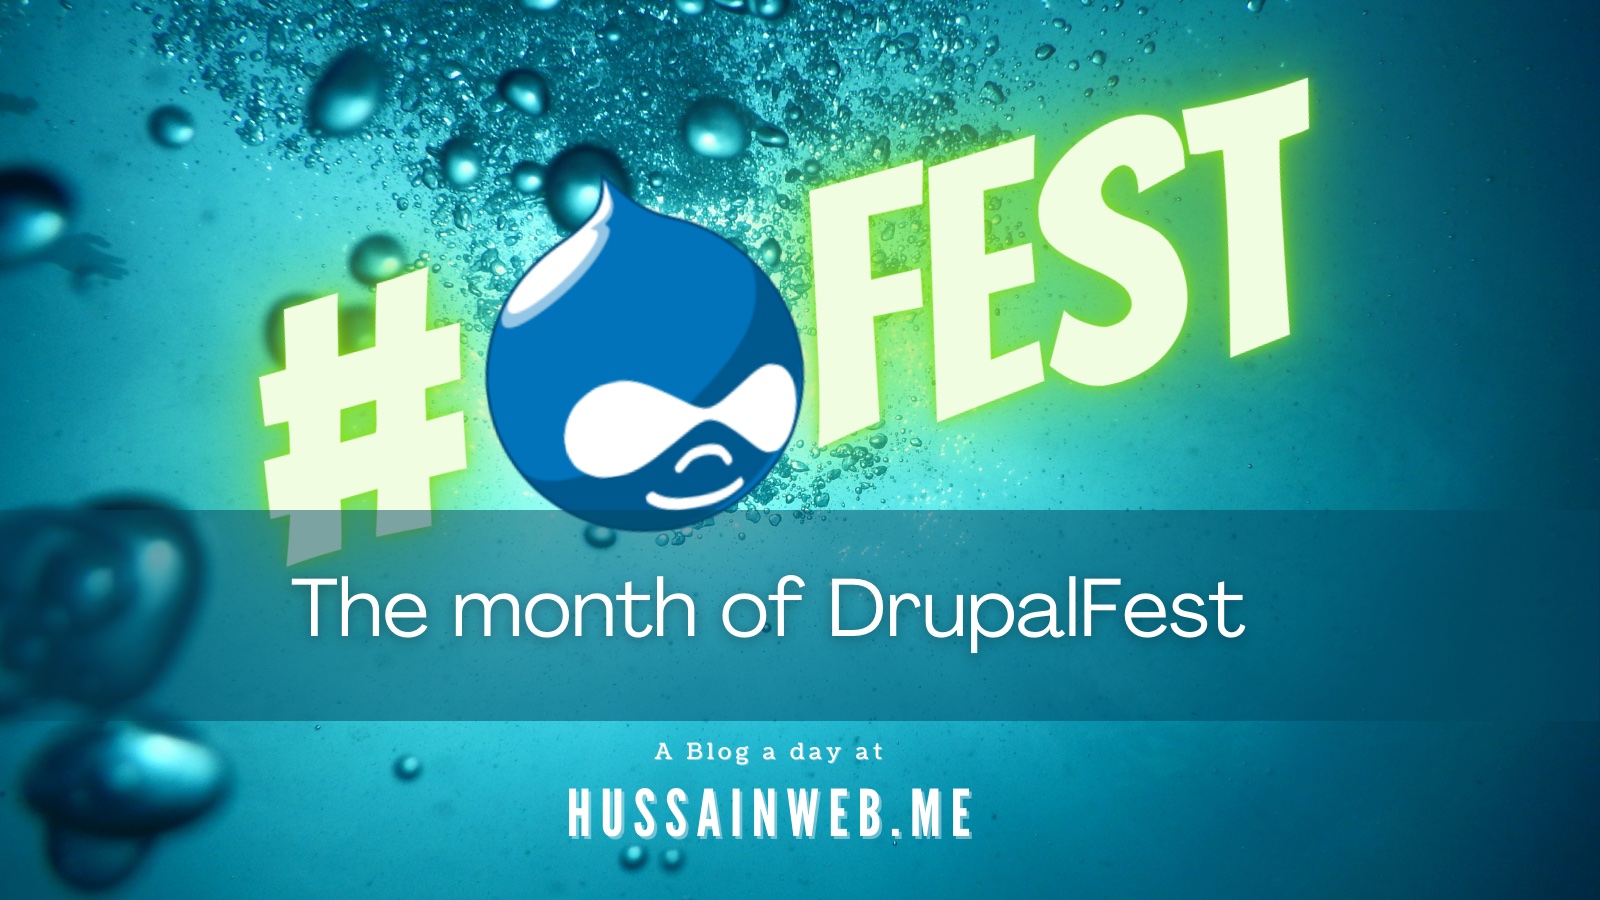 The month of DrupalFest